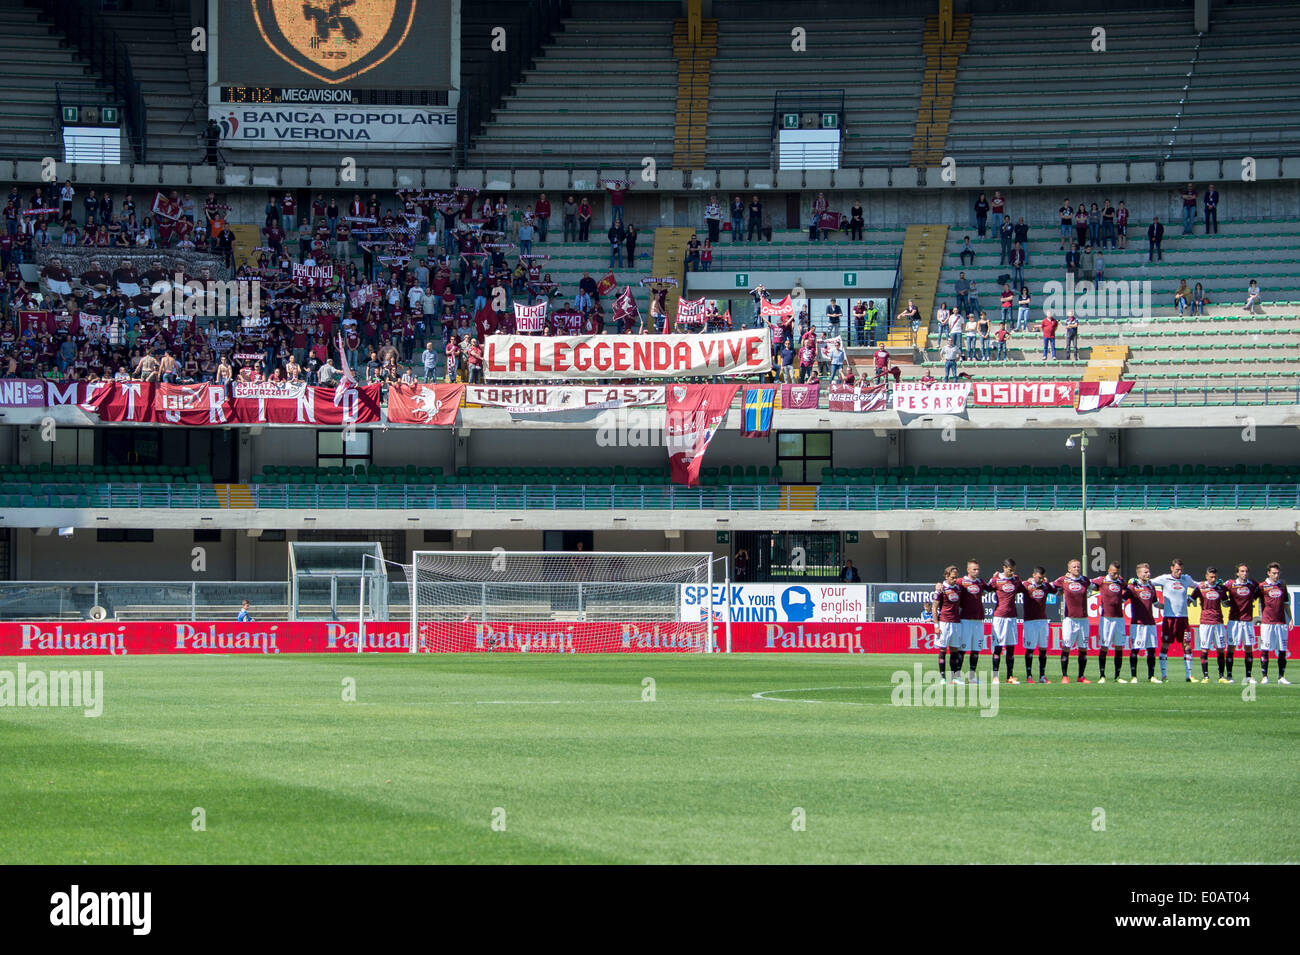 Torino Team Group High Resolution Stock Photography and Images - Alamy